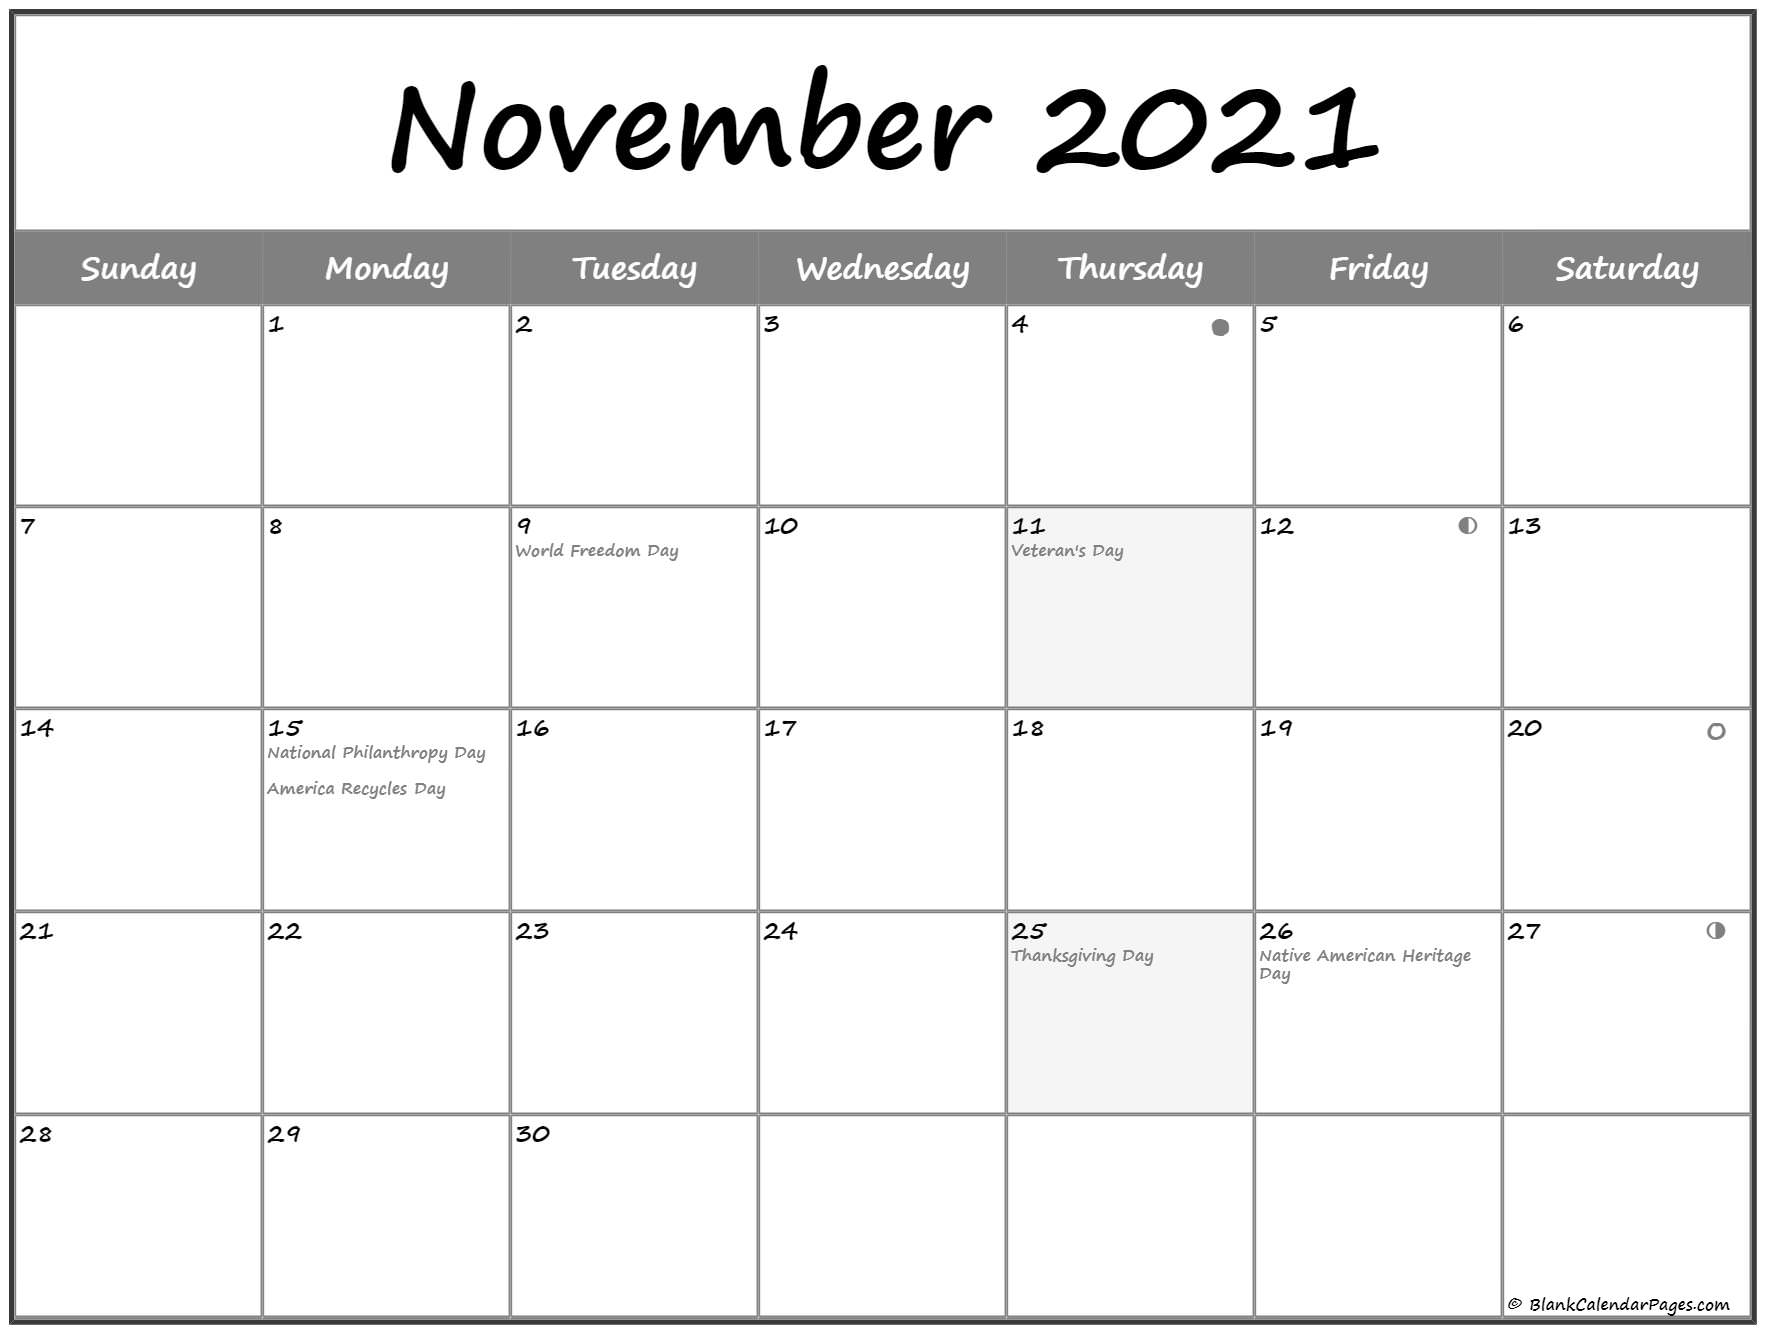 Get November 2021 With Moons